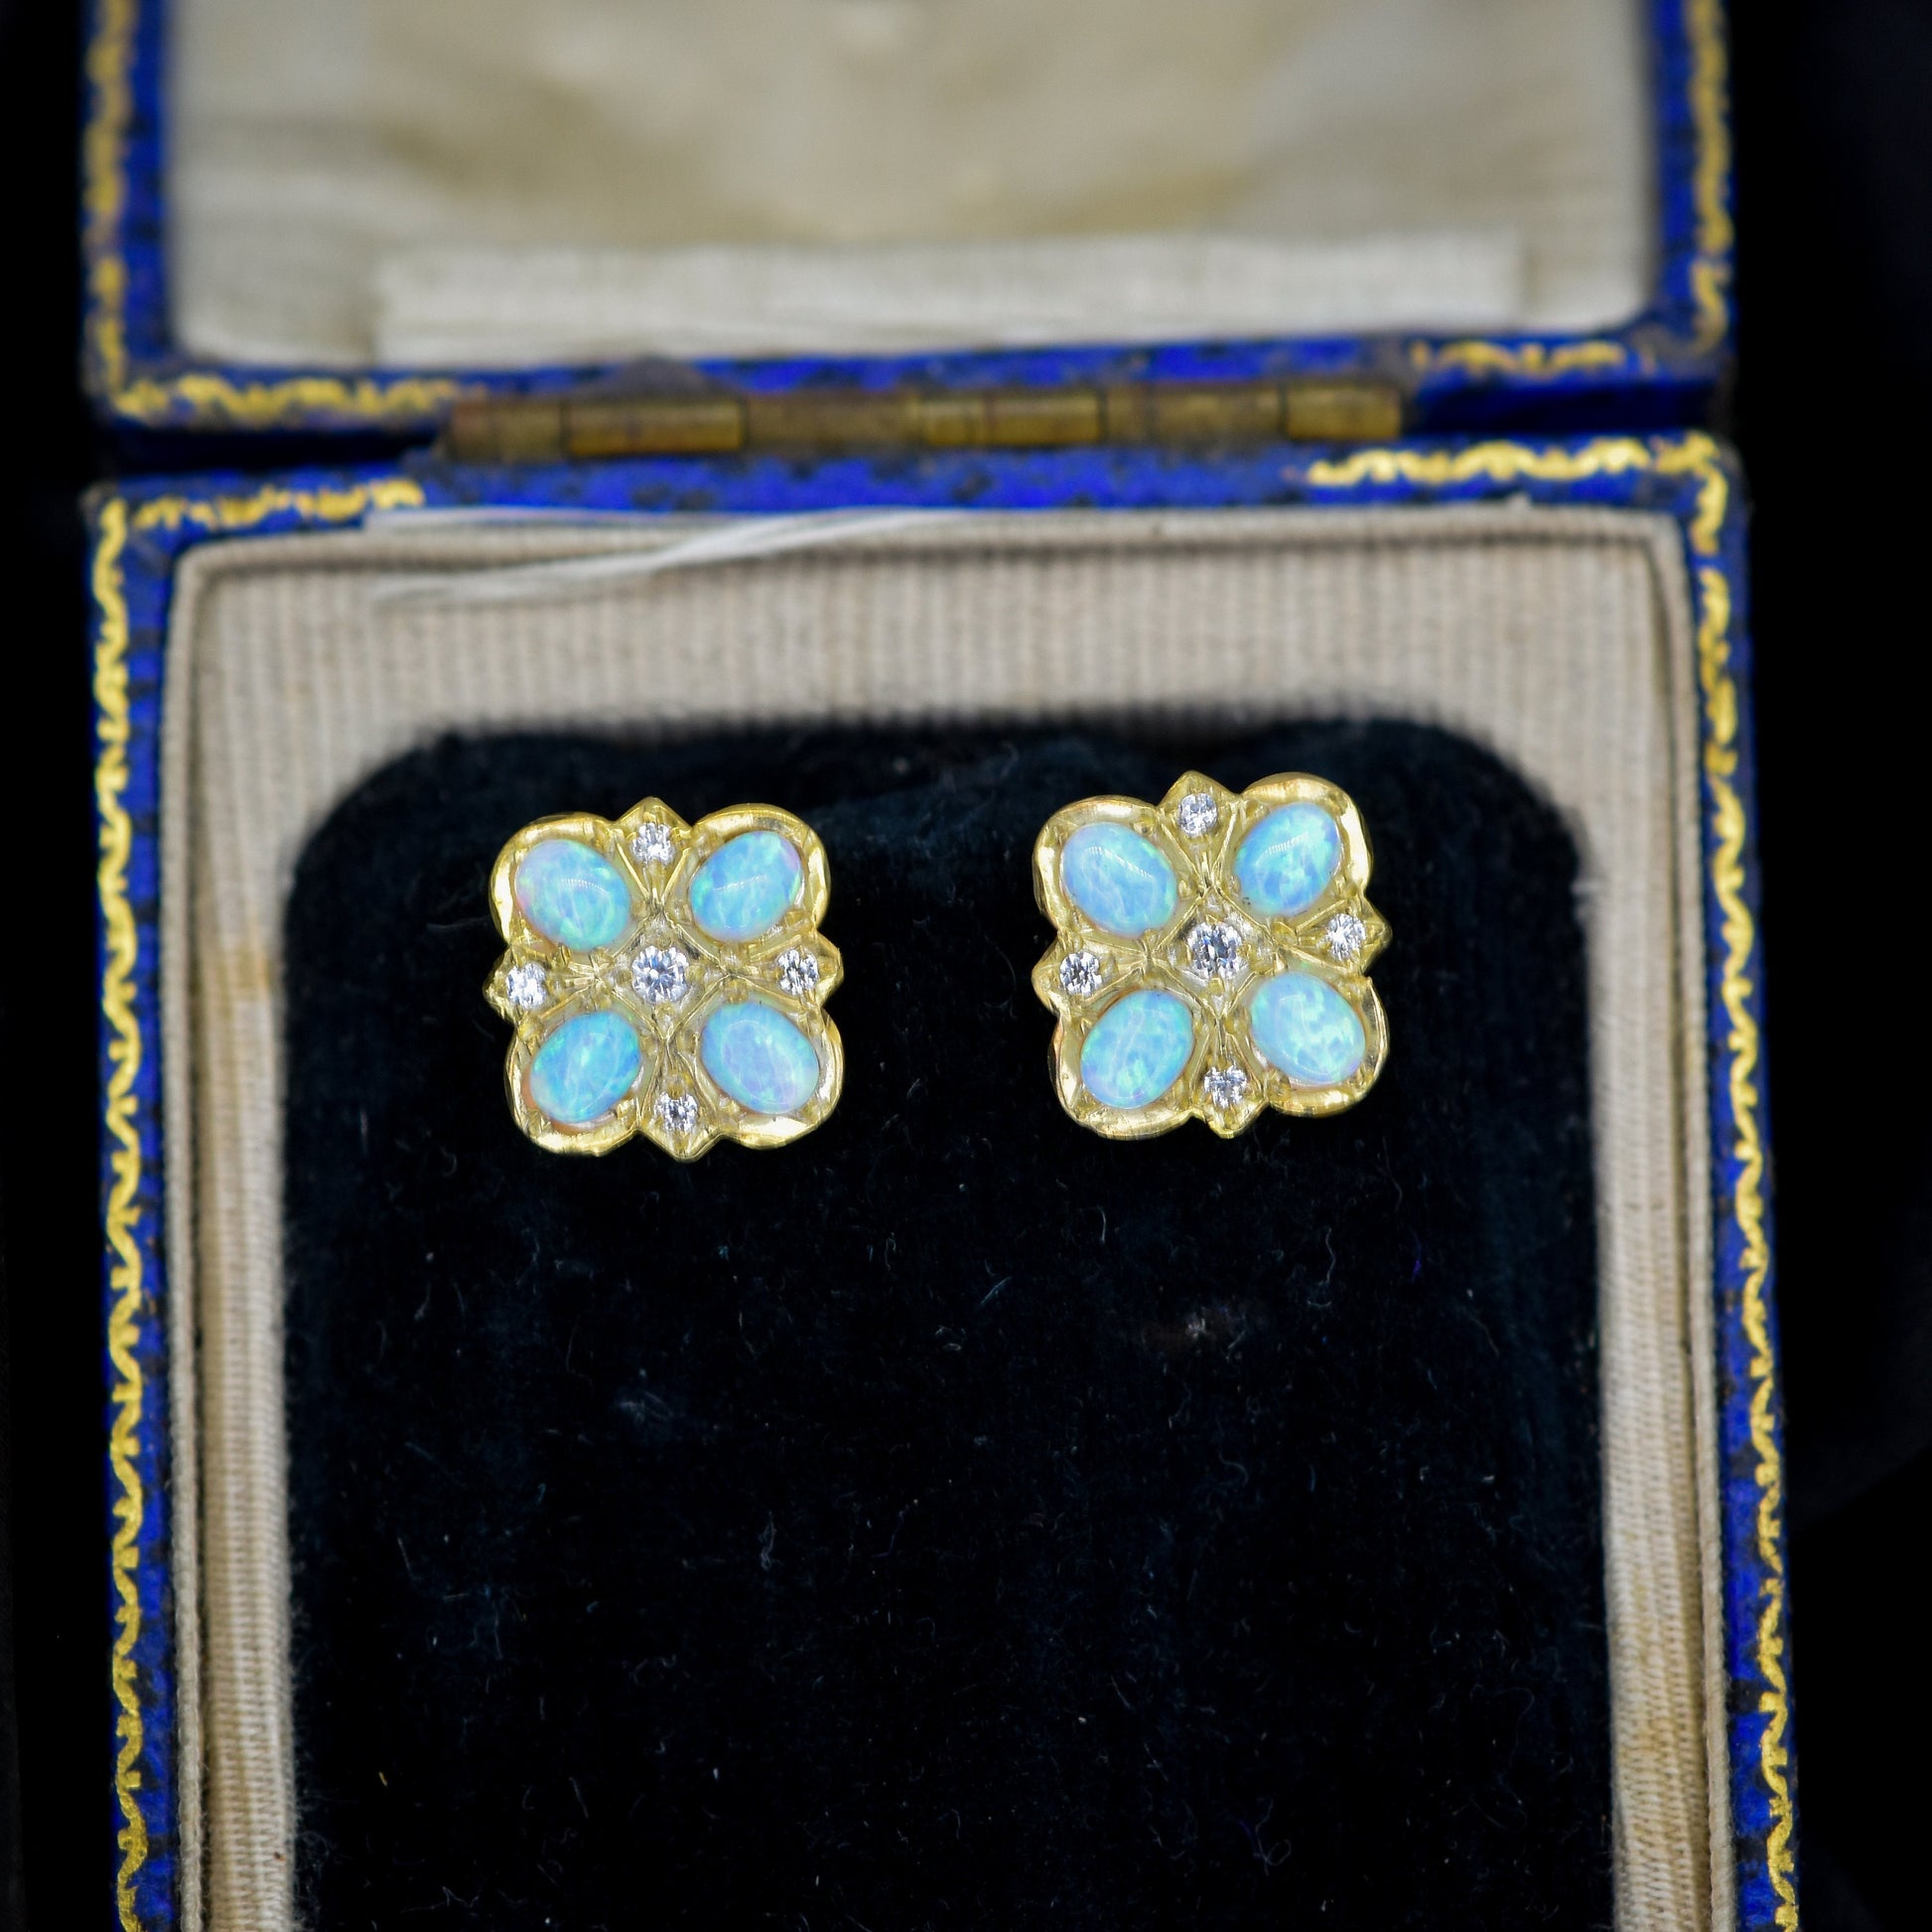 Opal and Paste 18ct Yellow Gold Gilded Silver Cluster Stud Earrings | Opal Studs